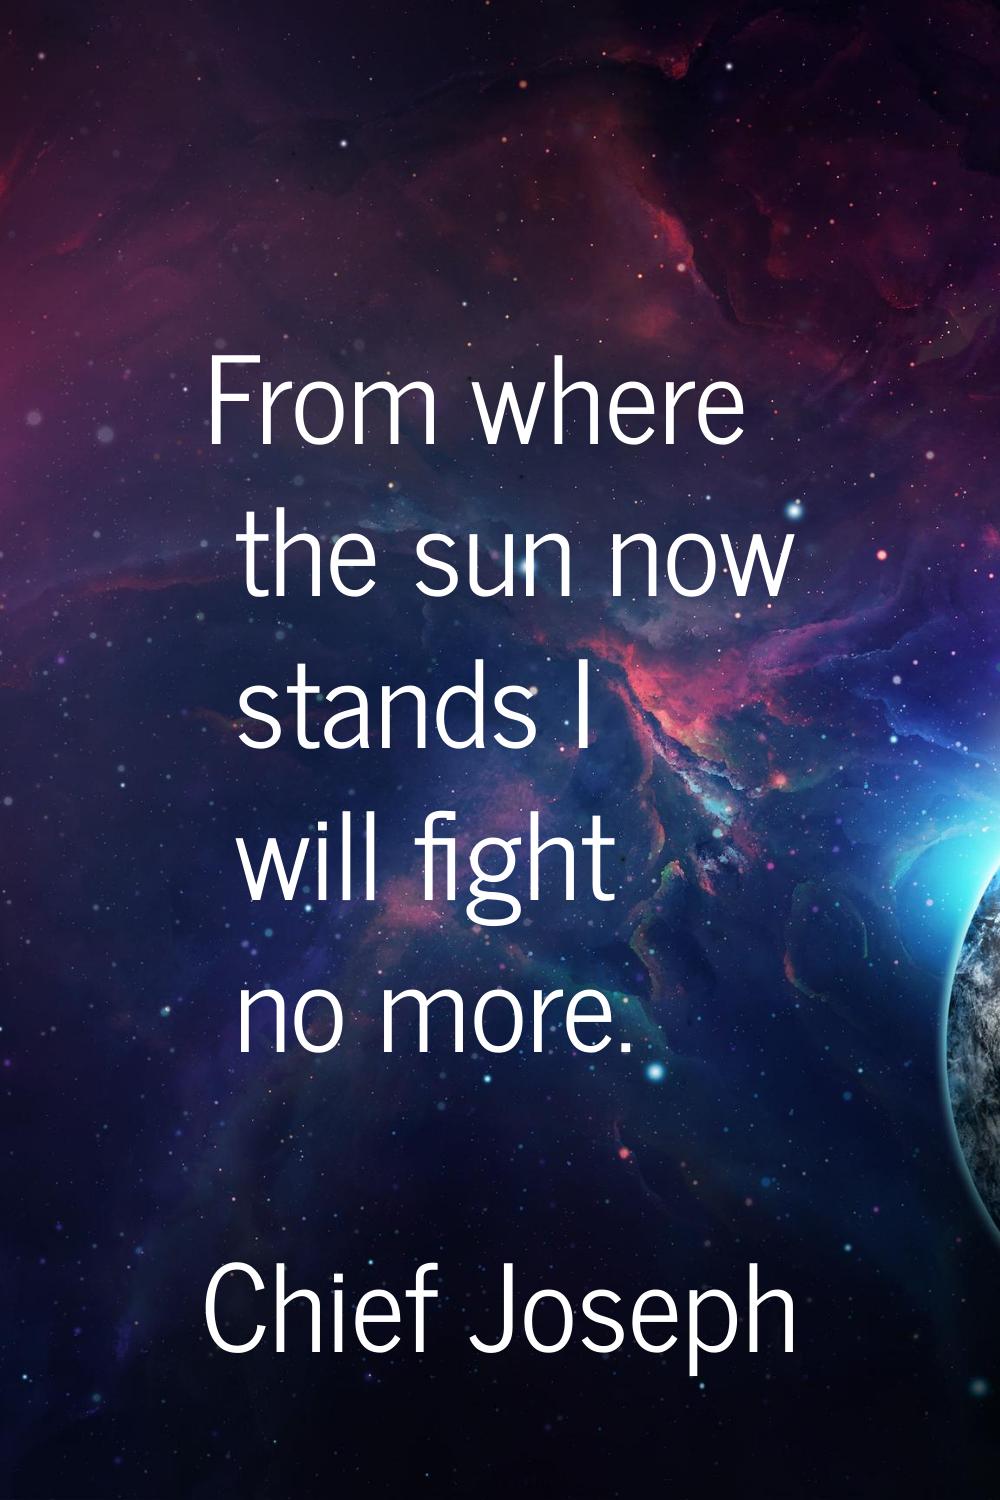 From where the sun now stands I will fight no more.